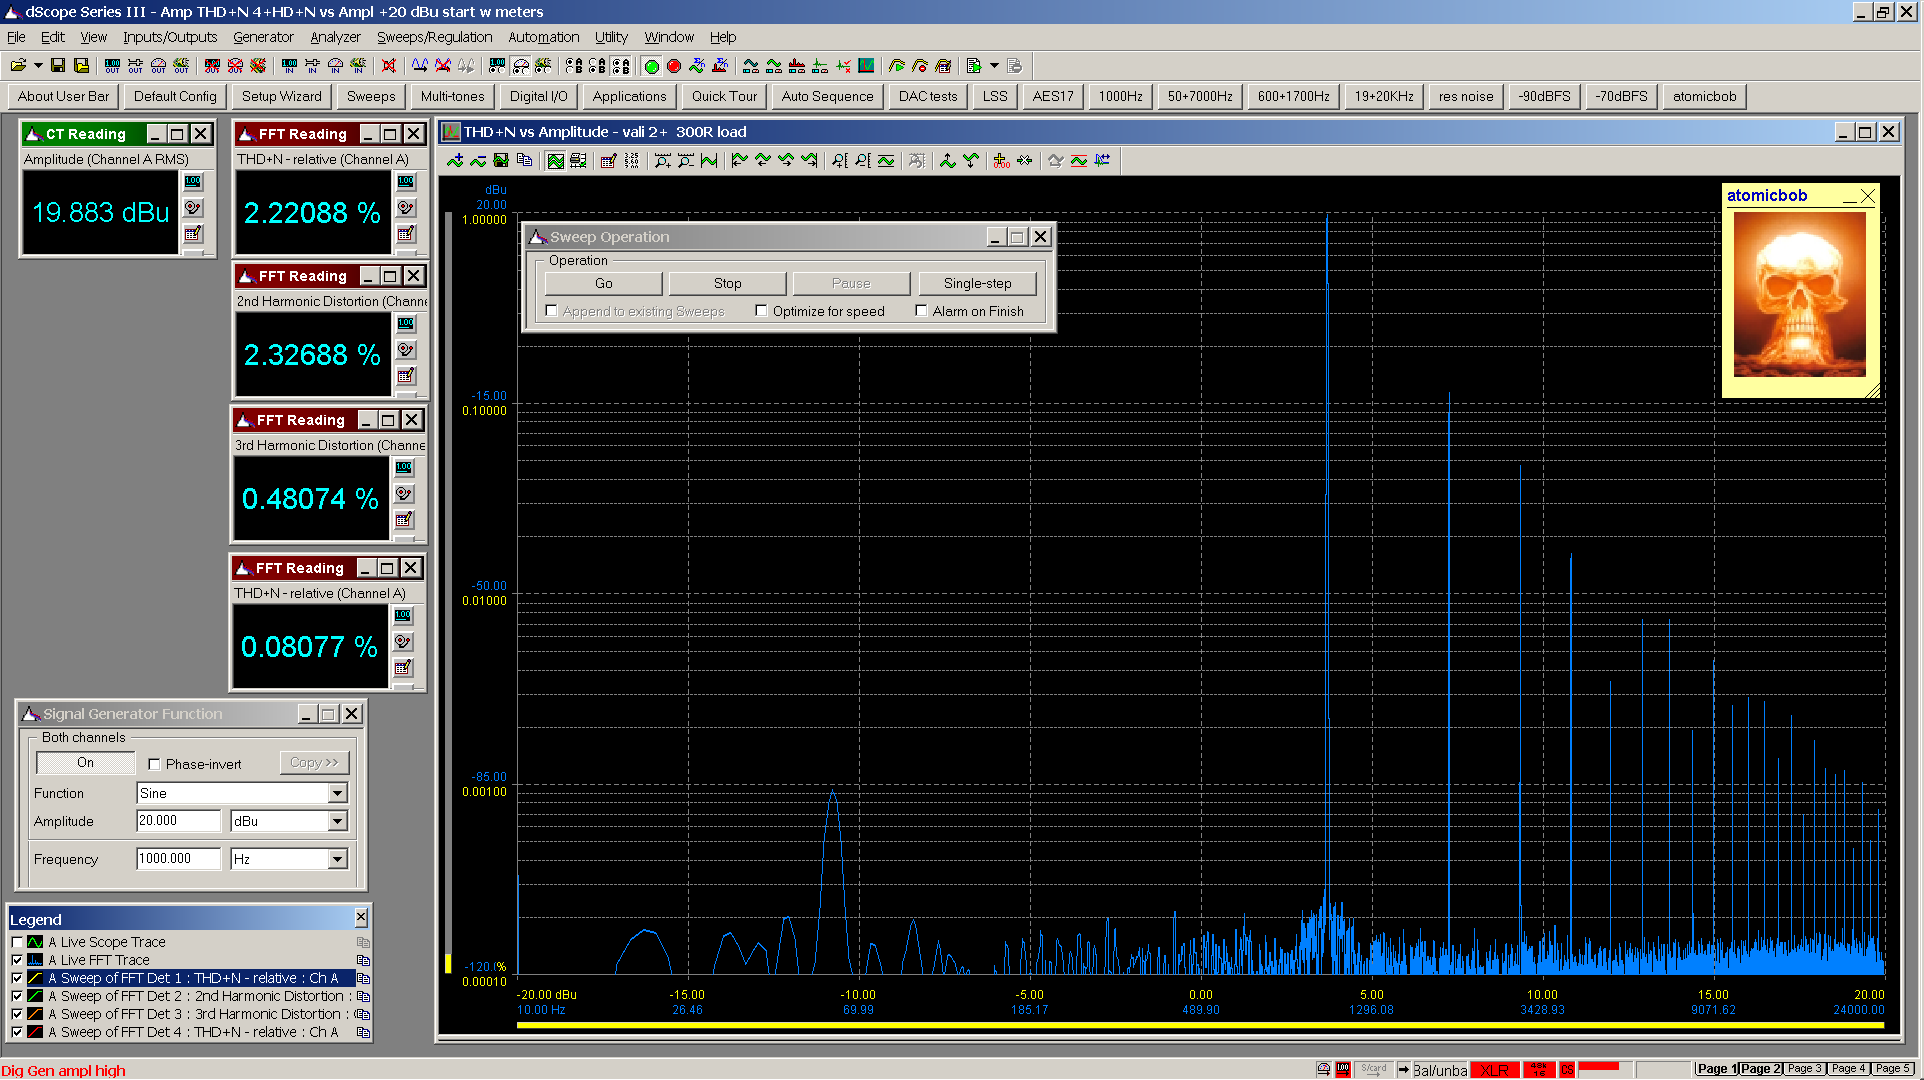 00 202200510-31 vali 2+ THD+N  4+HD+N vs amp 300R - vol set for 0 dB gain +20 dBu.png